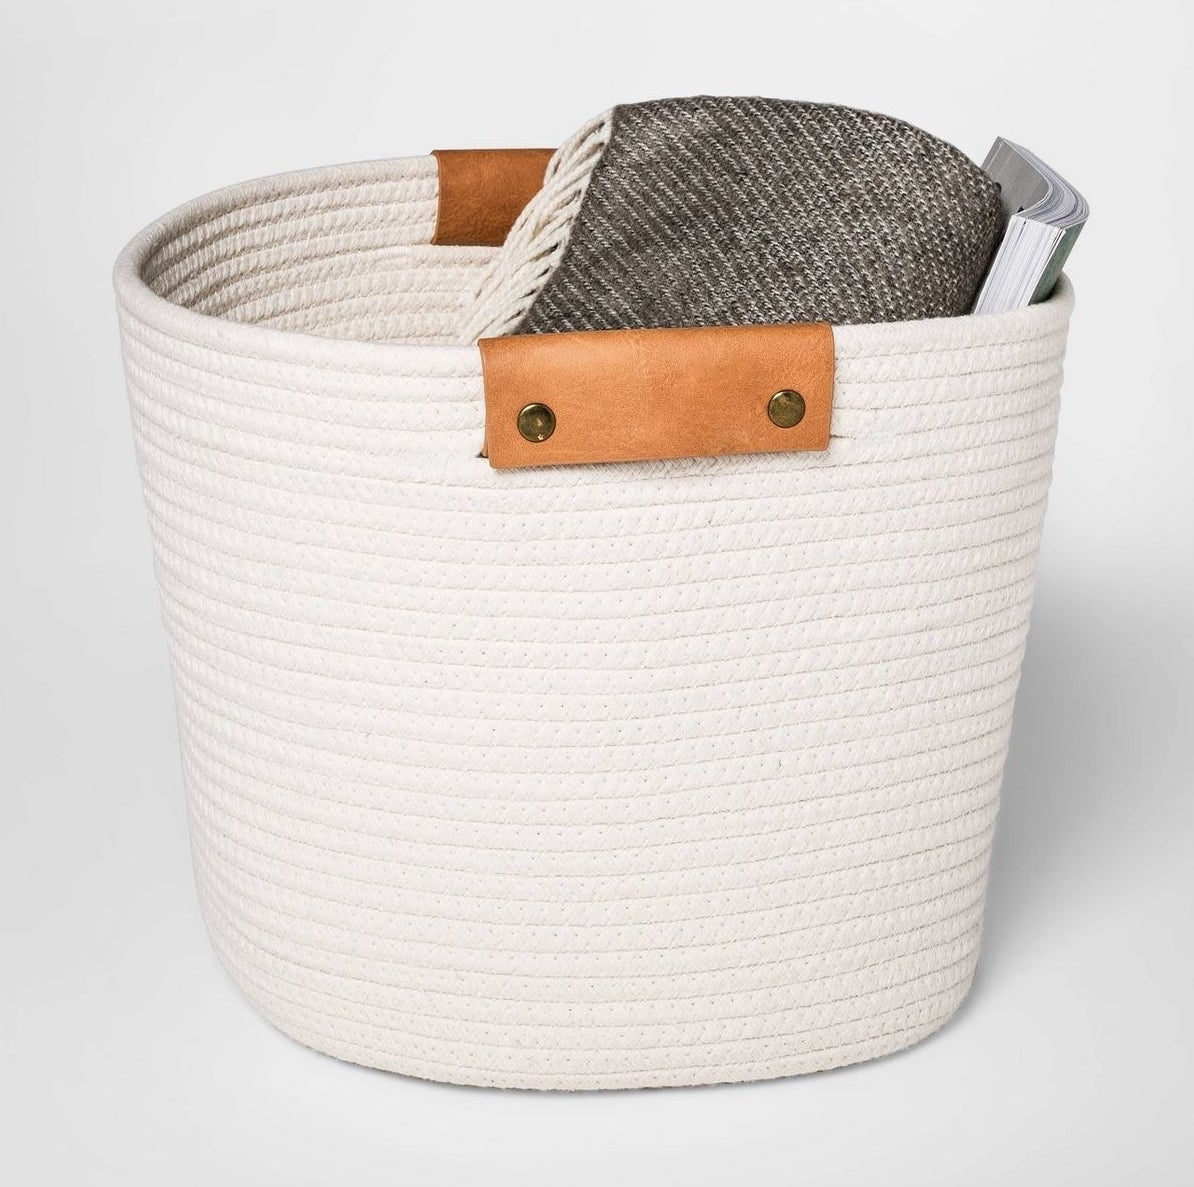 cream-colored woven rope basket with camel-colored handles